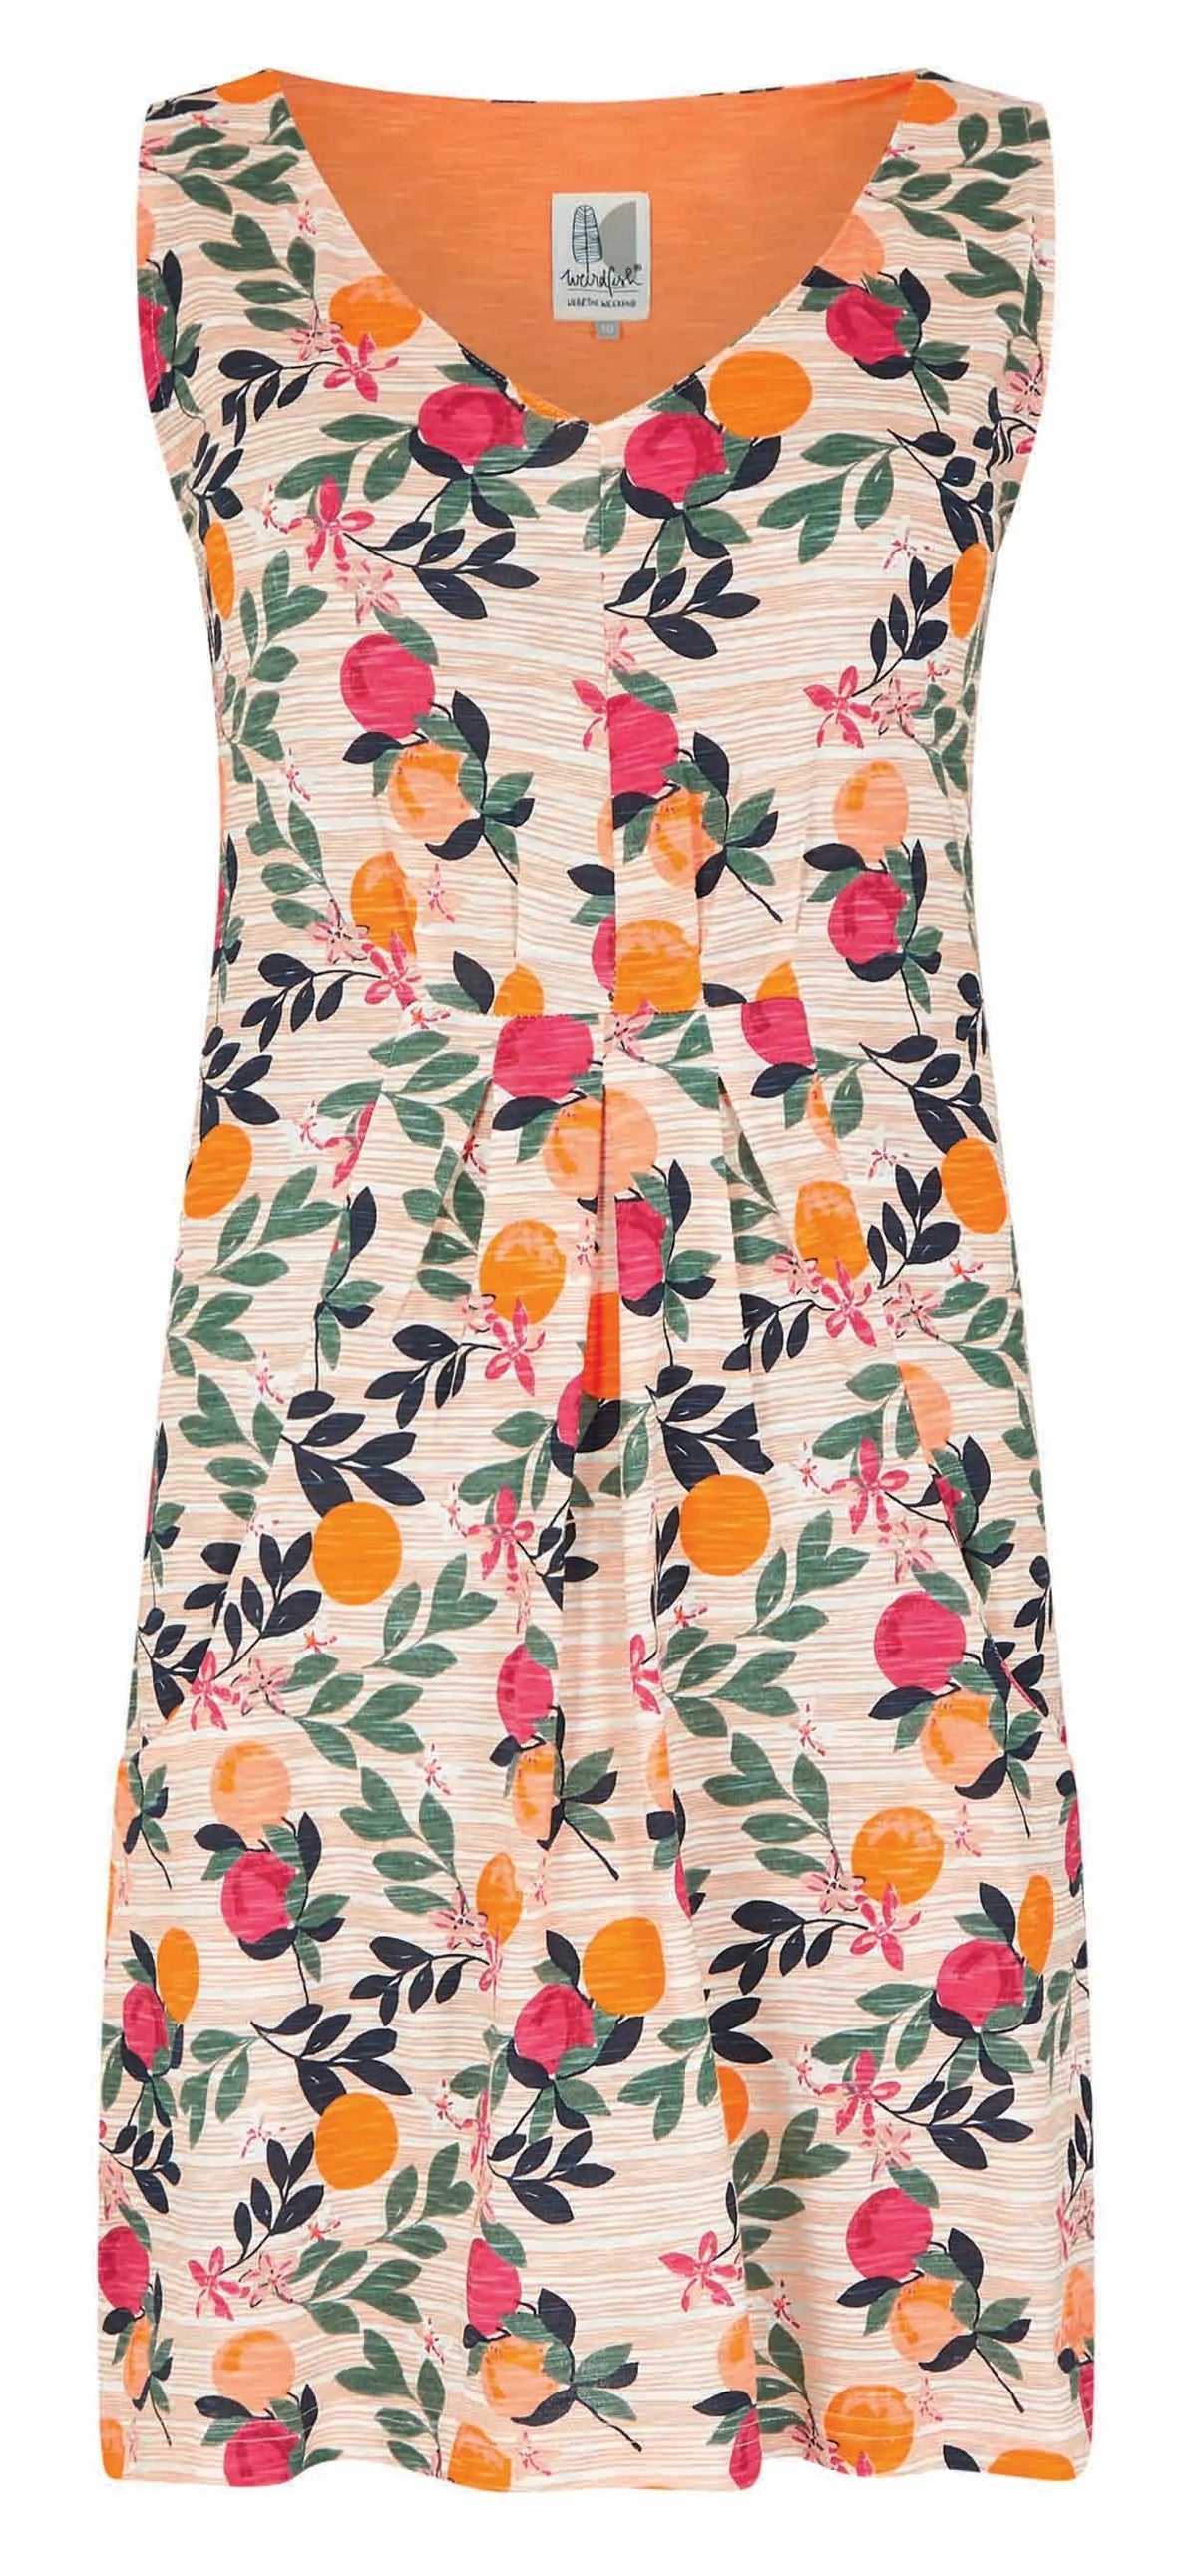 WWeird Fish women's Indus sleeveless v-neck jersey tunic in a bright Cantaloupe fruit and leaf pattern.